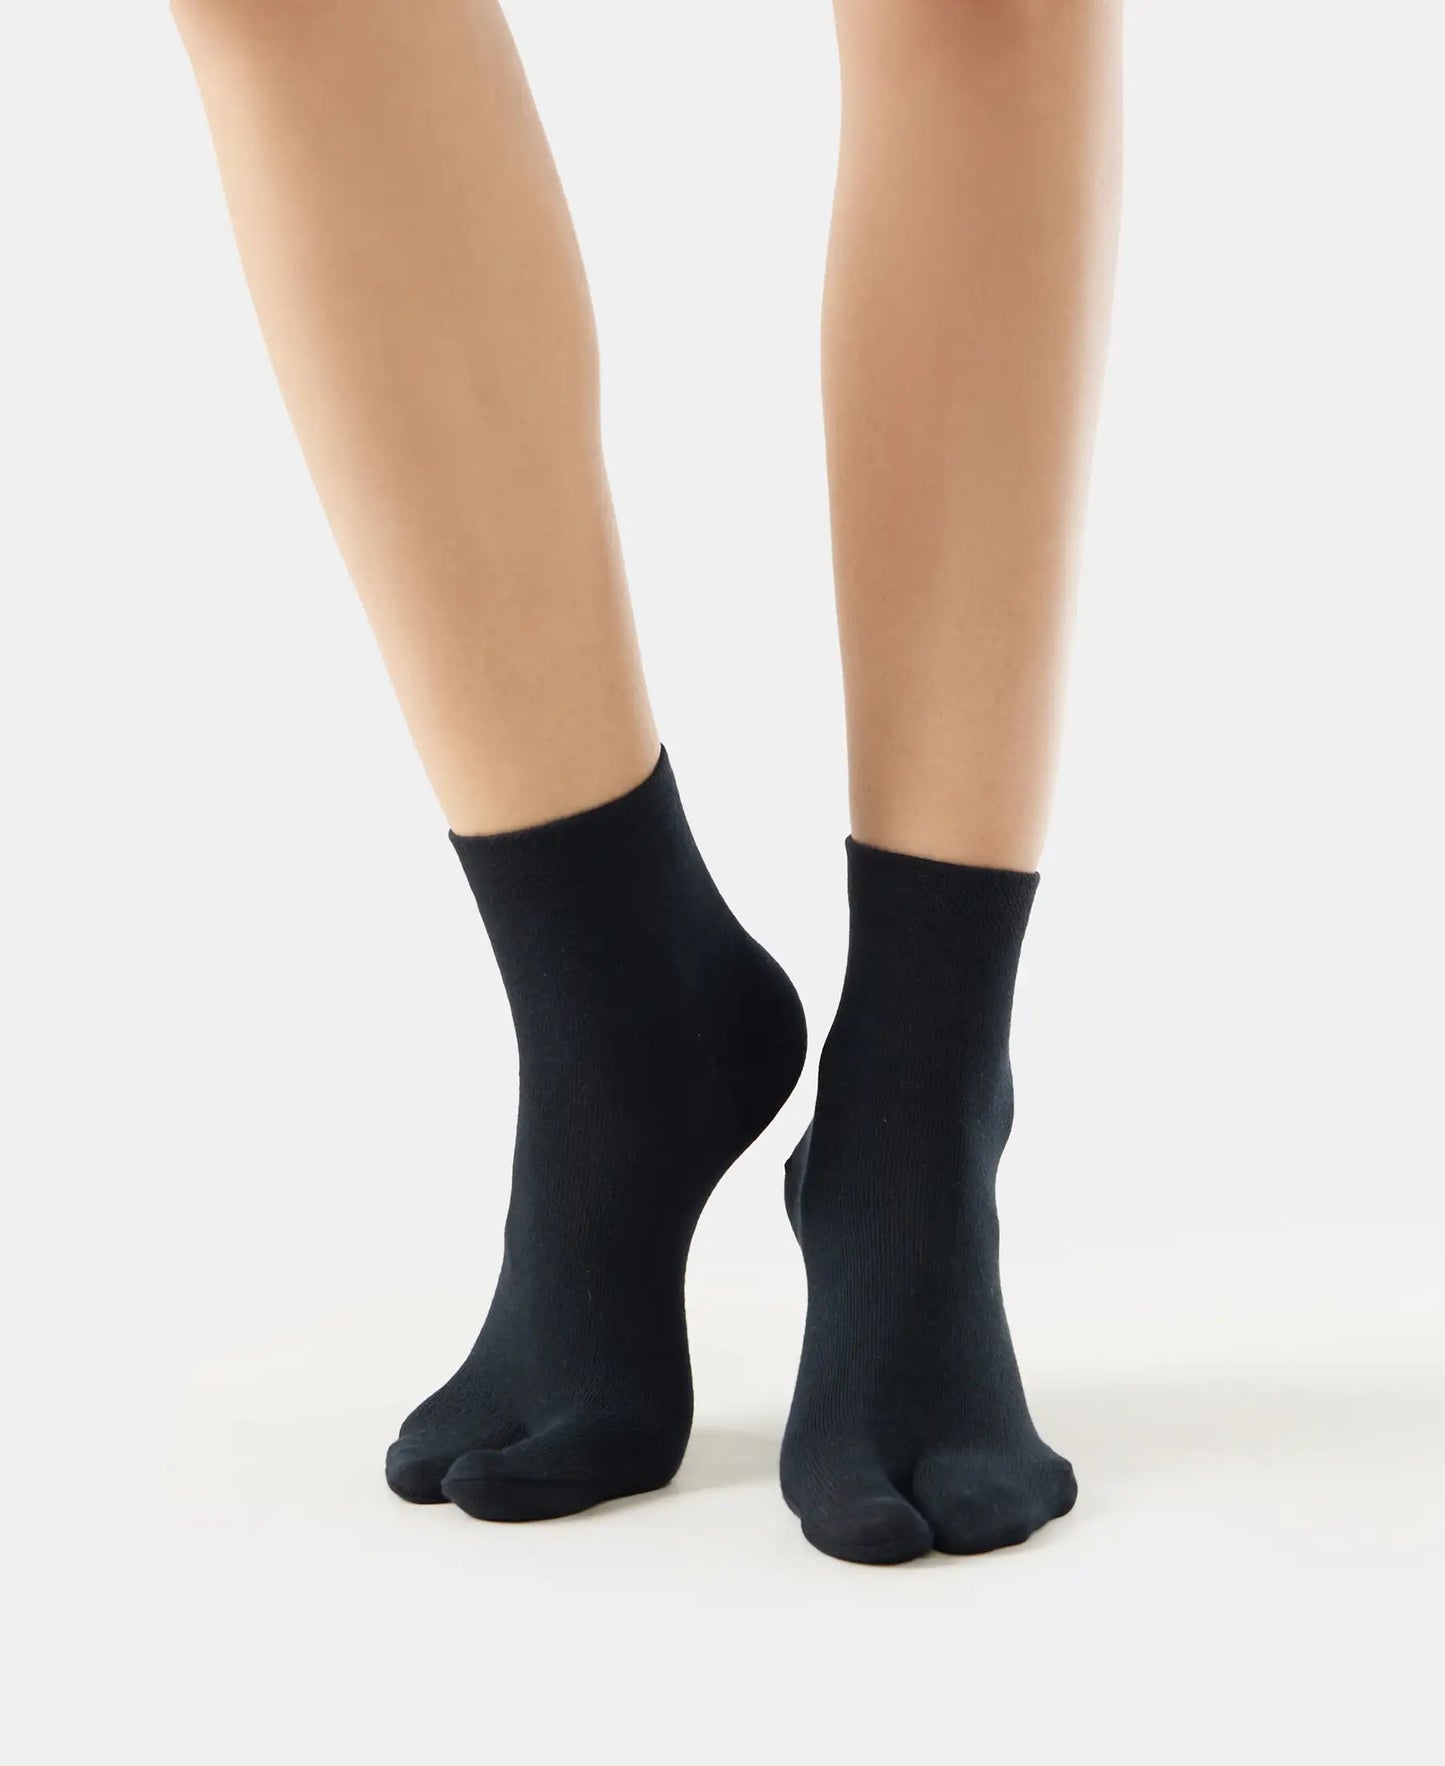 Compact Cotton Stretch Toe Socks with StayFresh Treatment - Black